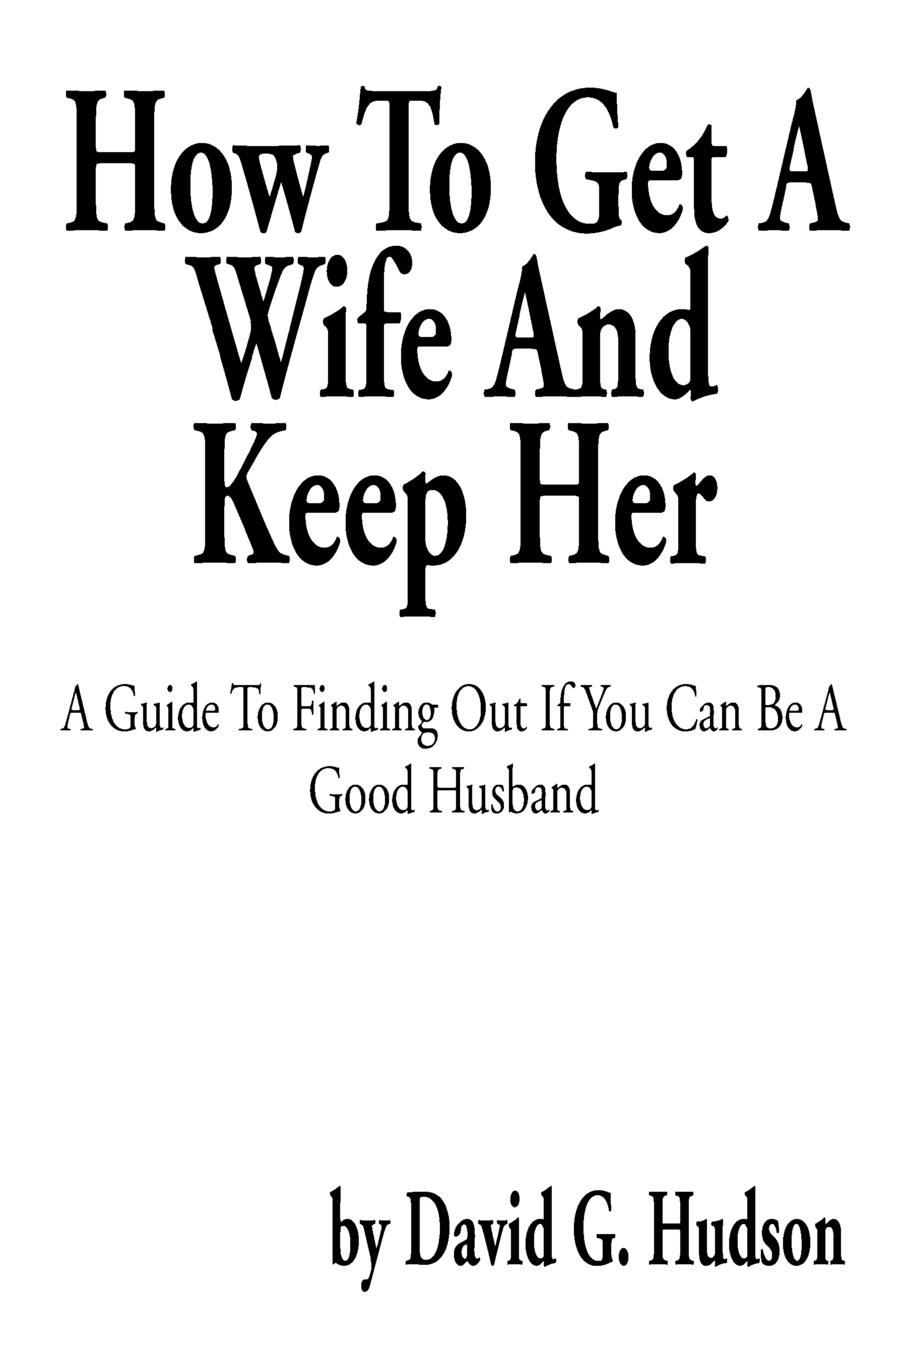 How to Get a Wife and Keep Her. A Guide to Finding Out If You Can Be a Good Husband